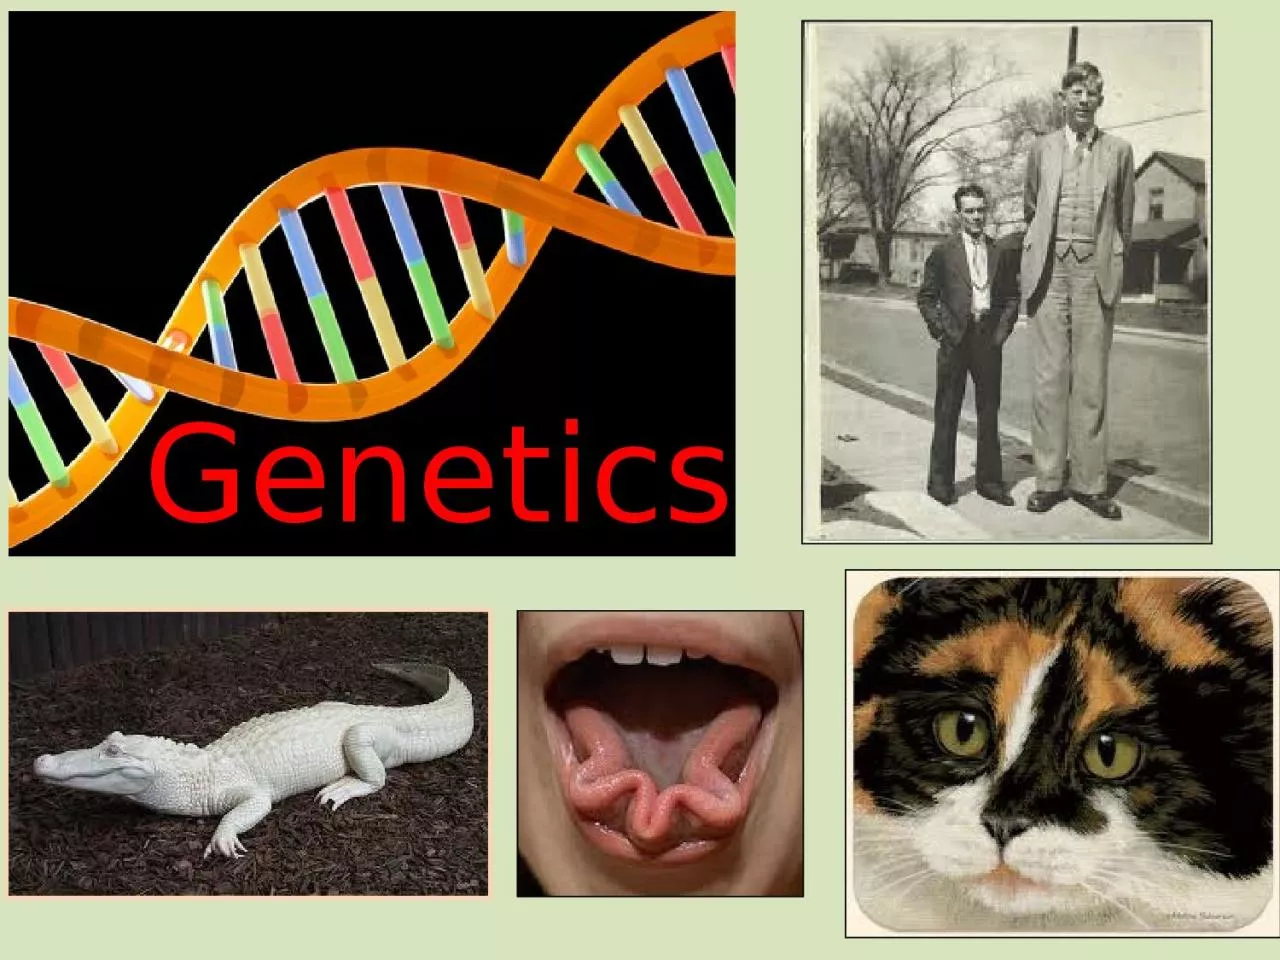 Genetics ….the science that studies how genes are transmitted from one generation to